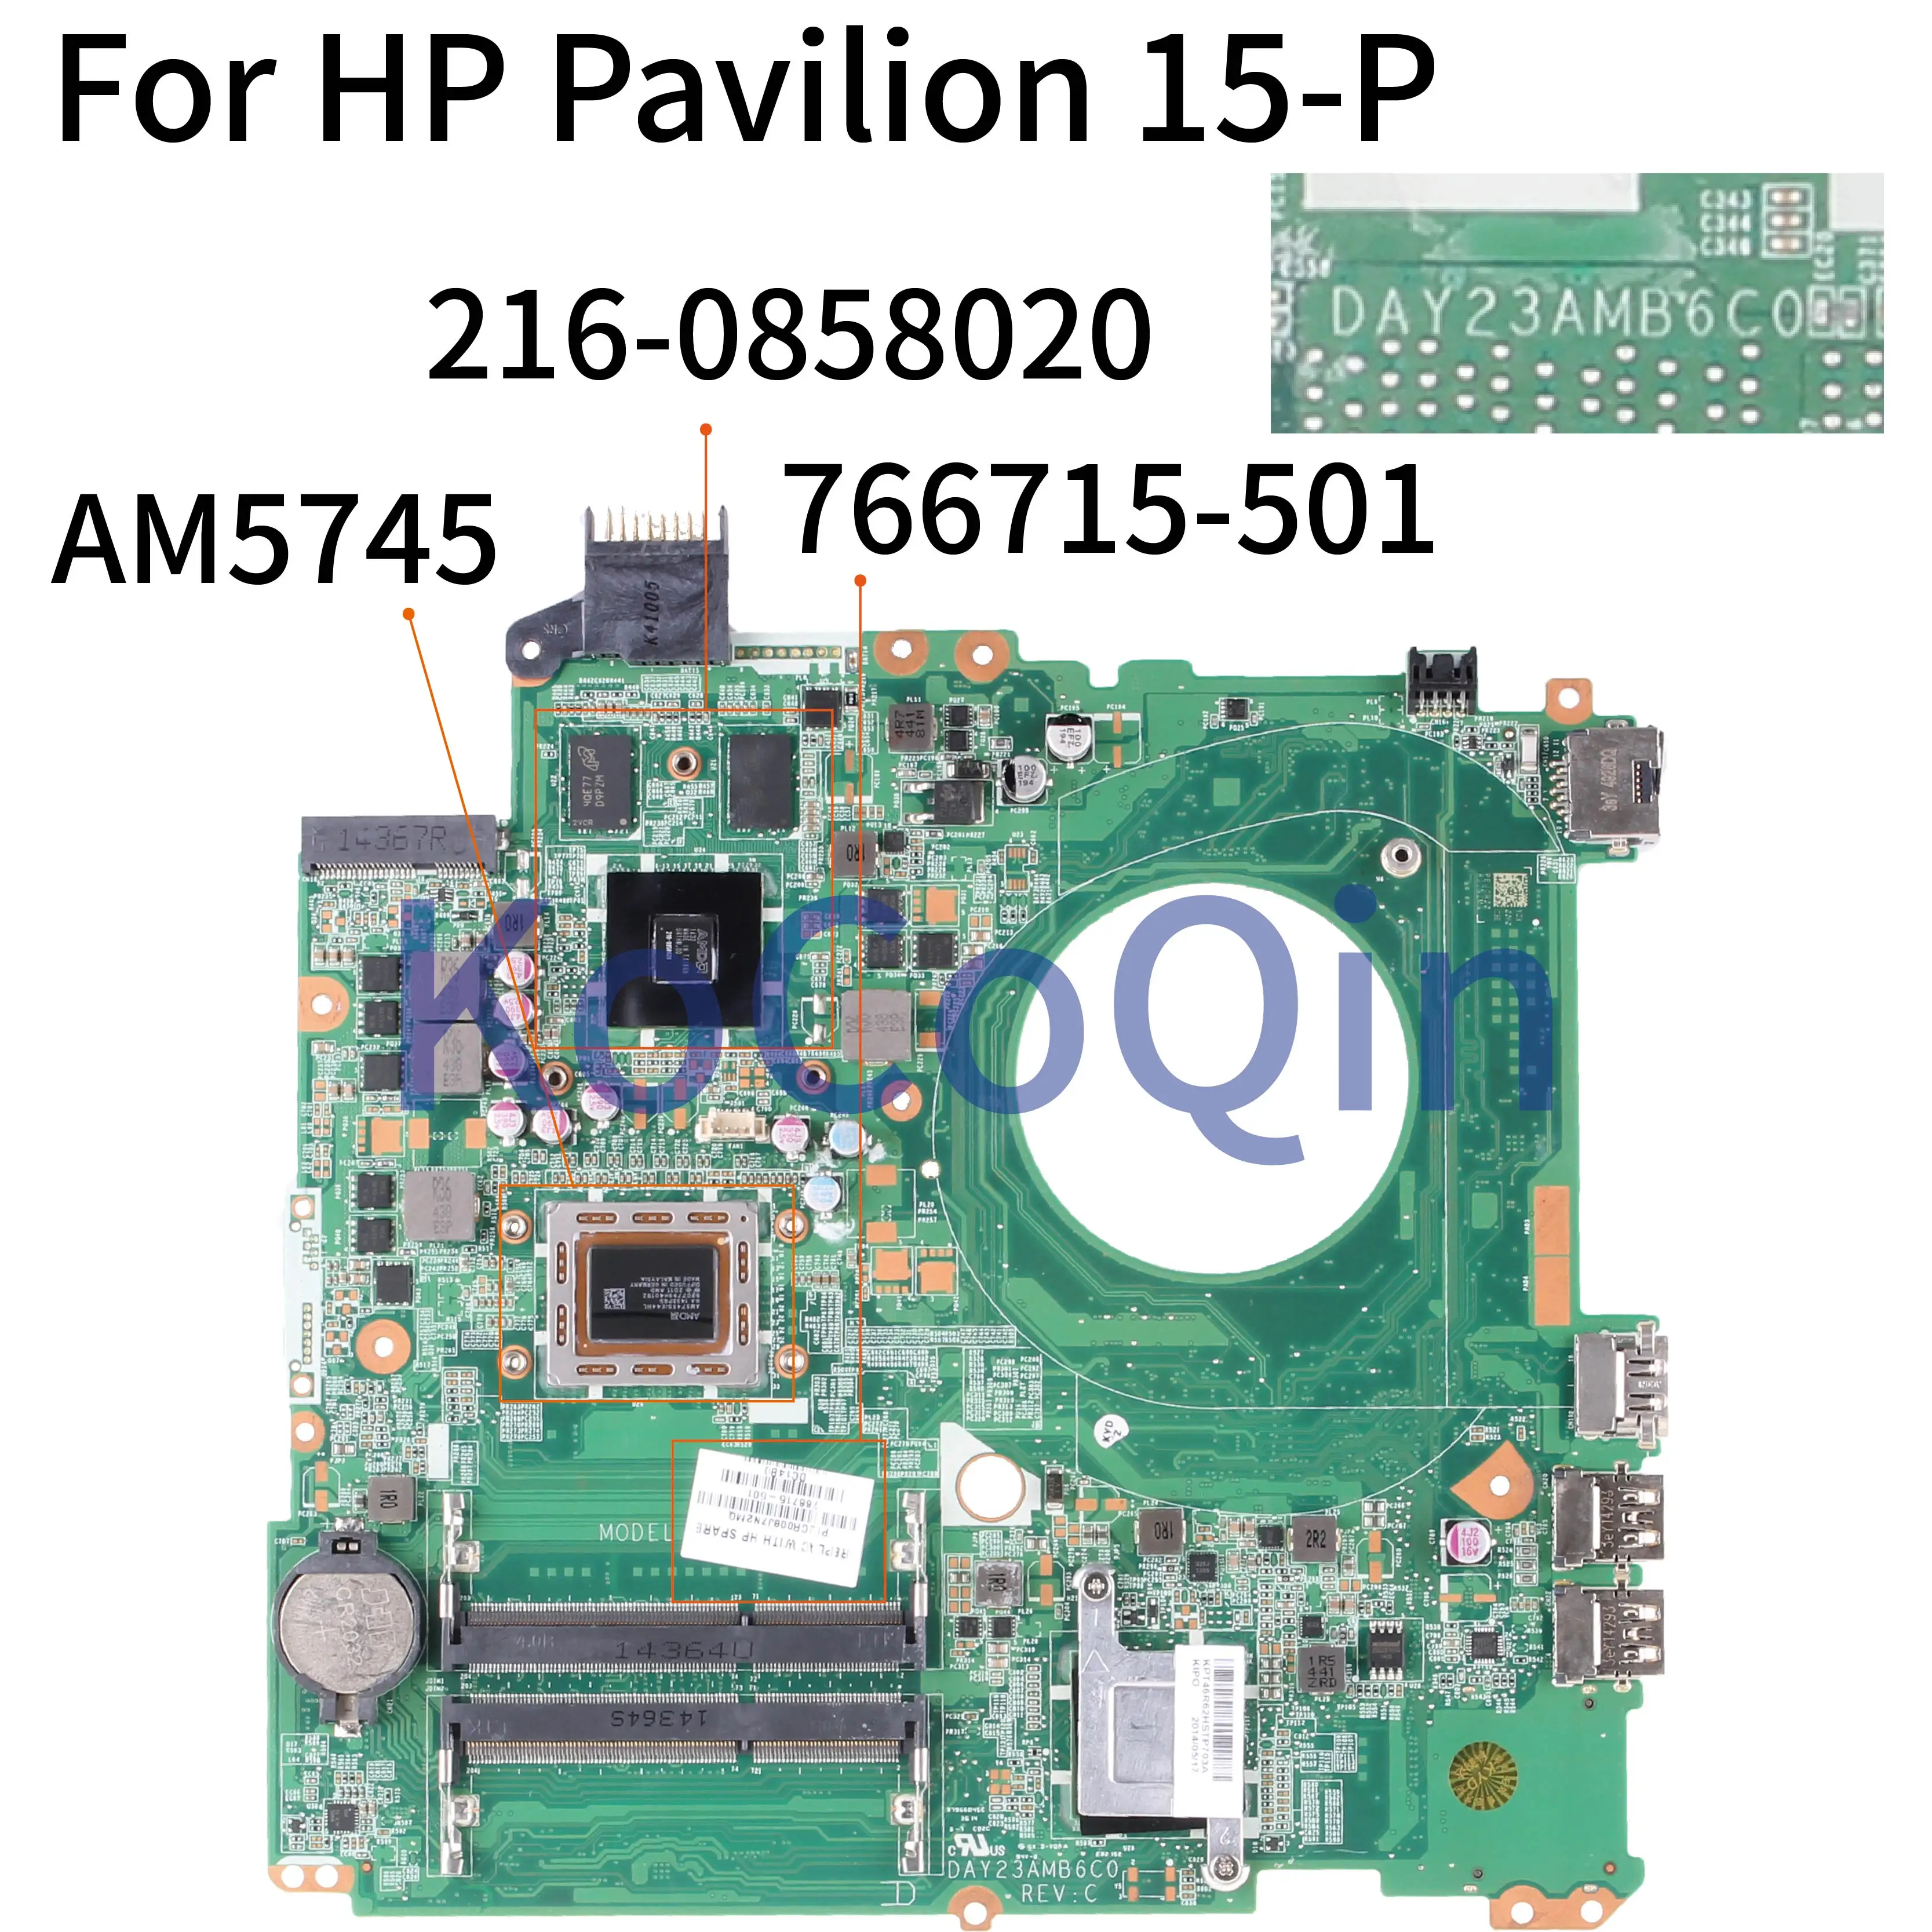 Promotion  KoCoQin Laptop motherboard For HP Pavilion 15-P Series AM5745 216-0858020 Mainboard 766715-001 7667